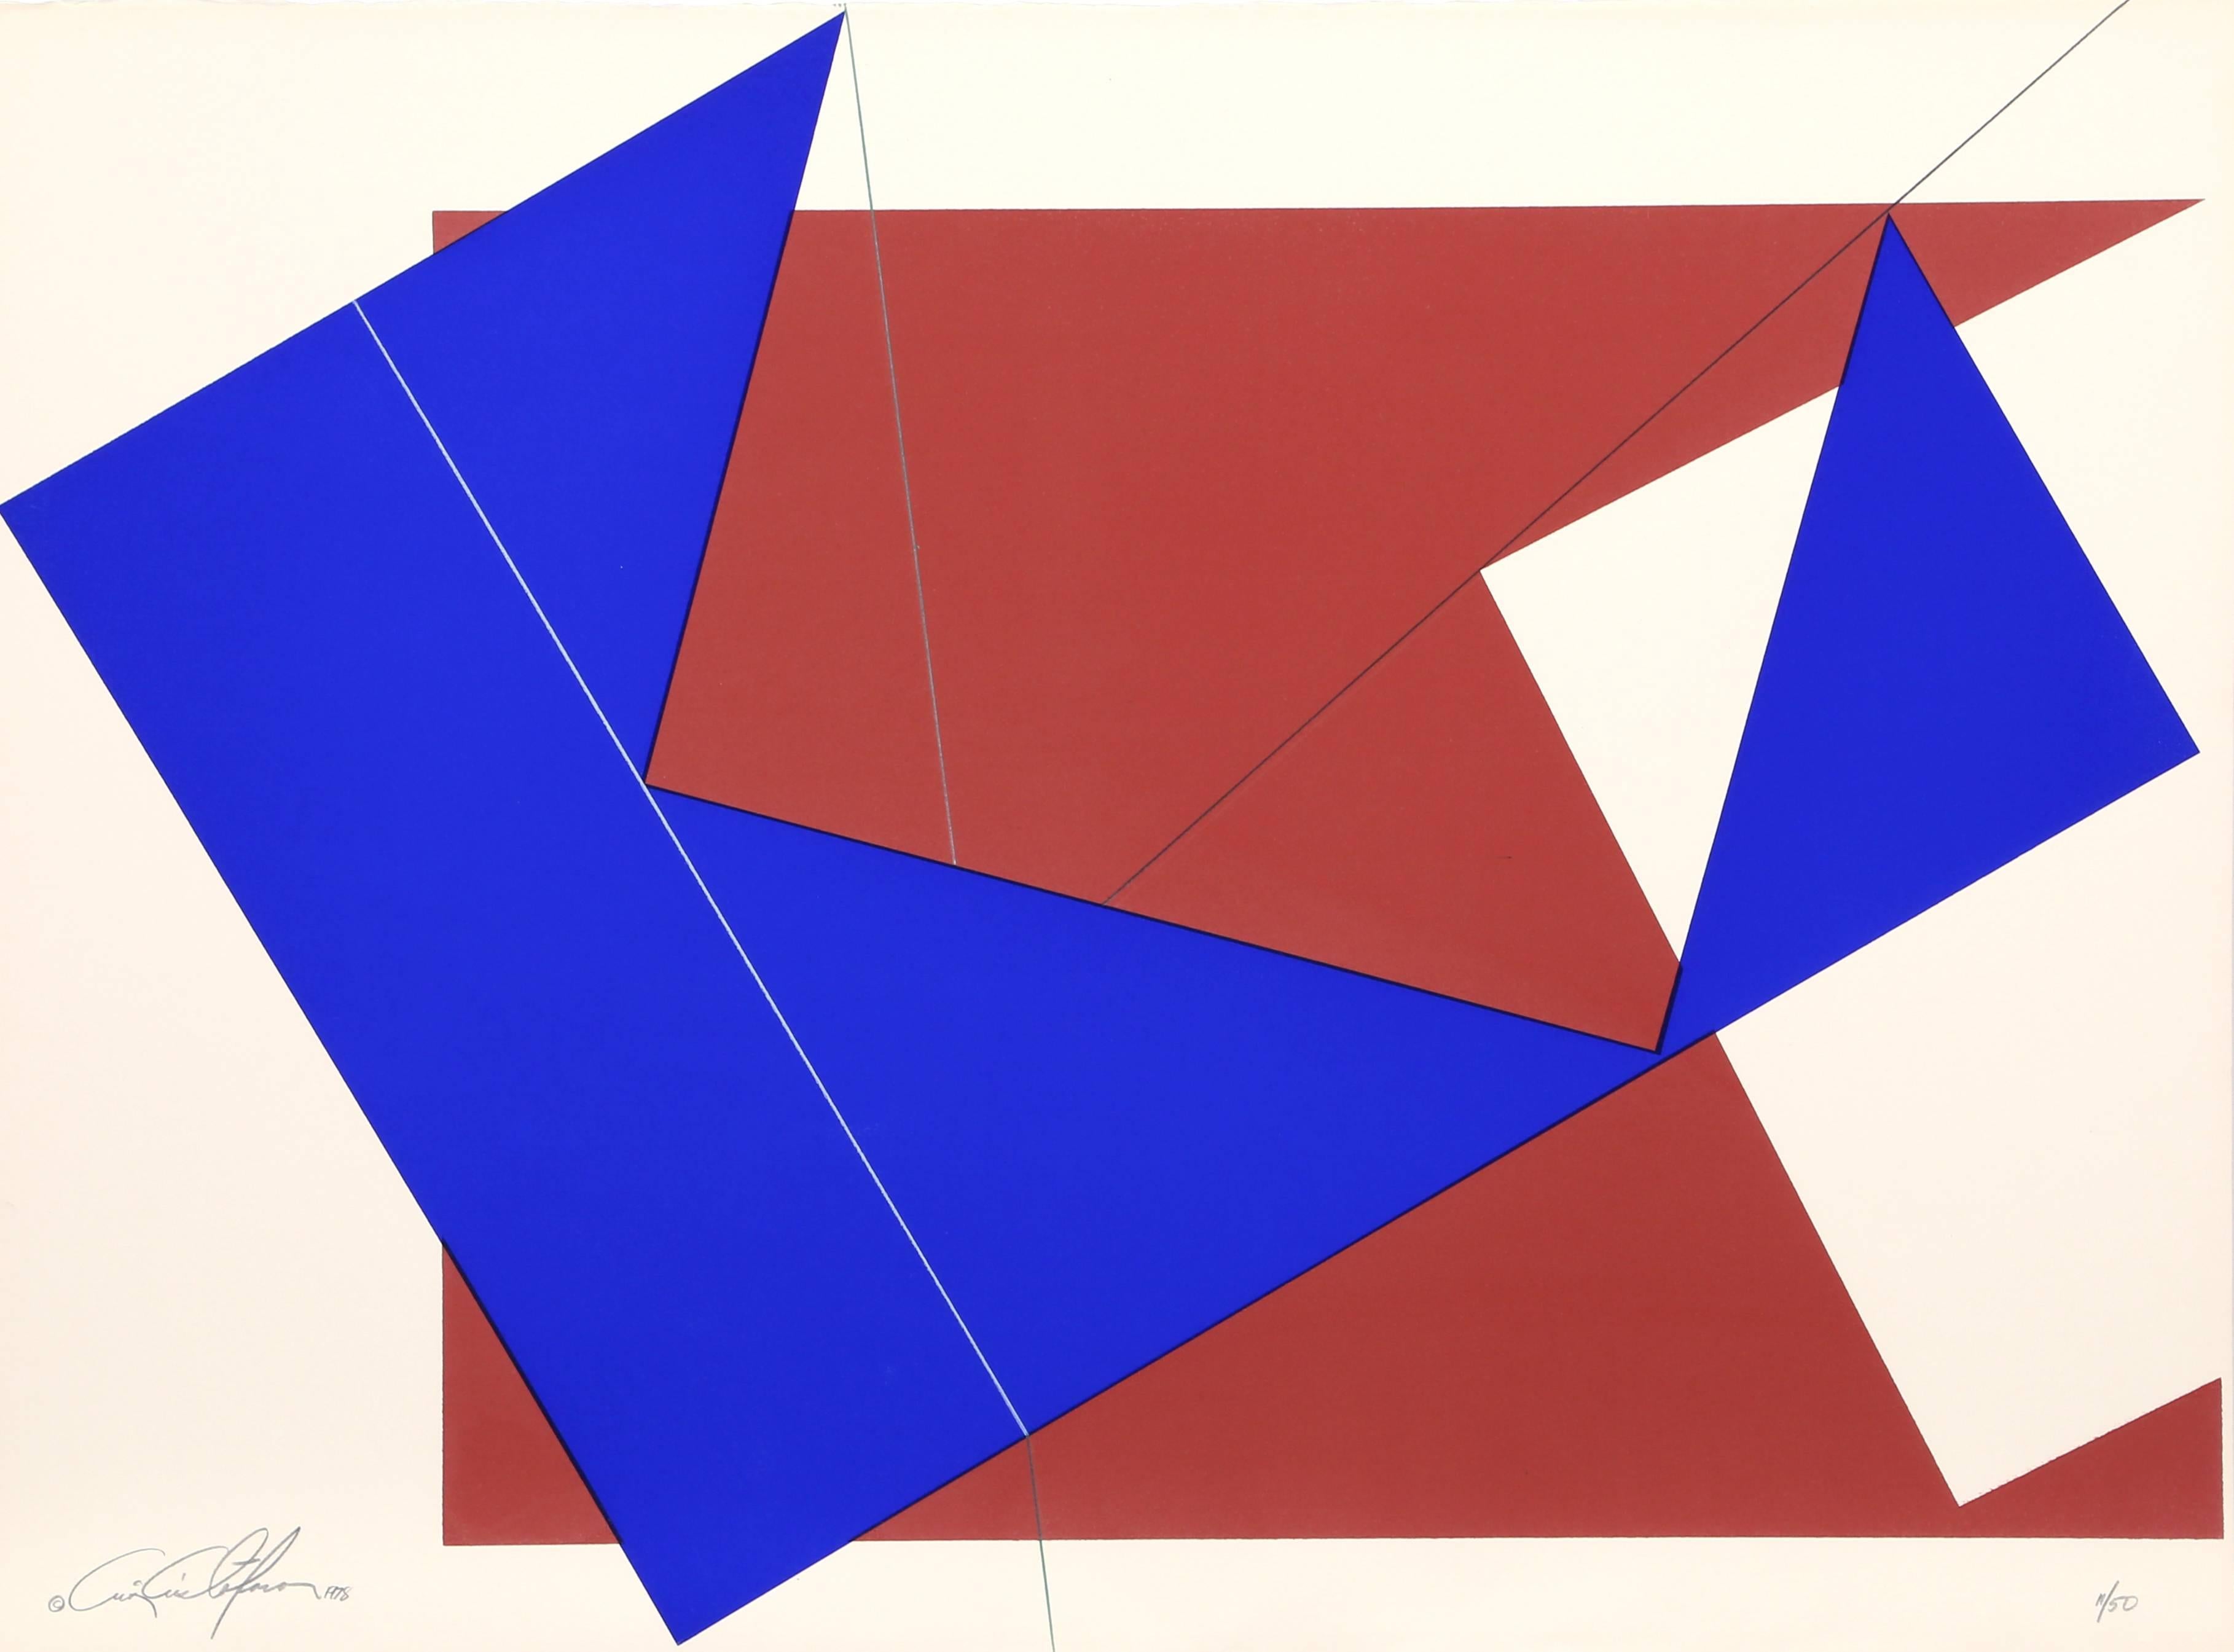 Artist: Cris Cristofaro, American
Title: Untitled - Blue and Red Rectangles
Year: 1978
Medium: Silkscreen on Arches Paper, signed and numbered in pencil
Edition: 50
Size: 22 x 30 in. (55.88 x 76.2 cm)